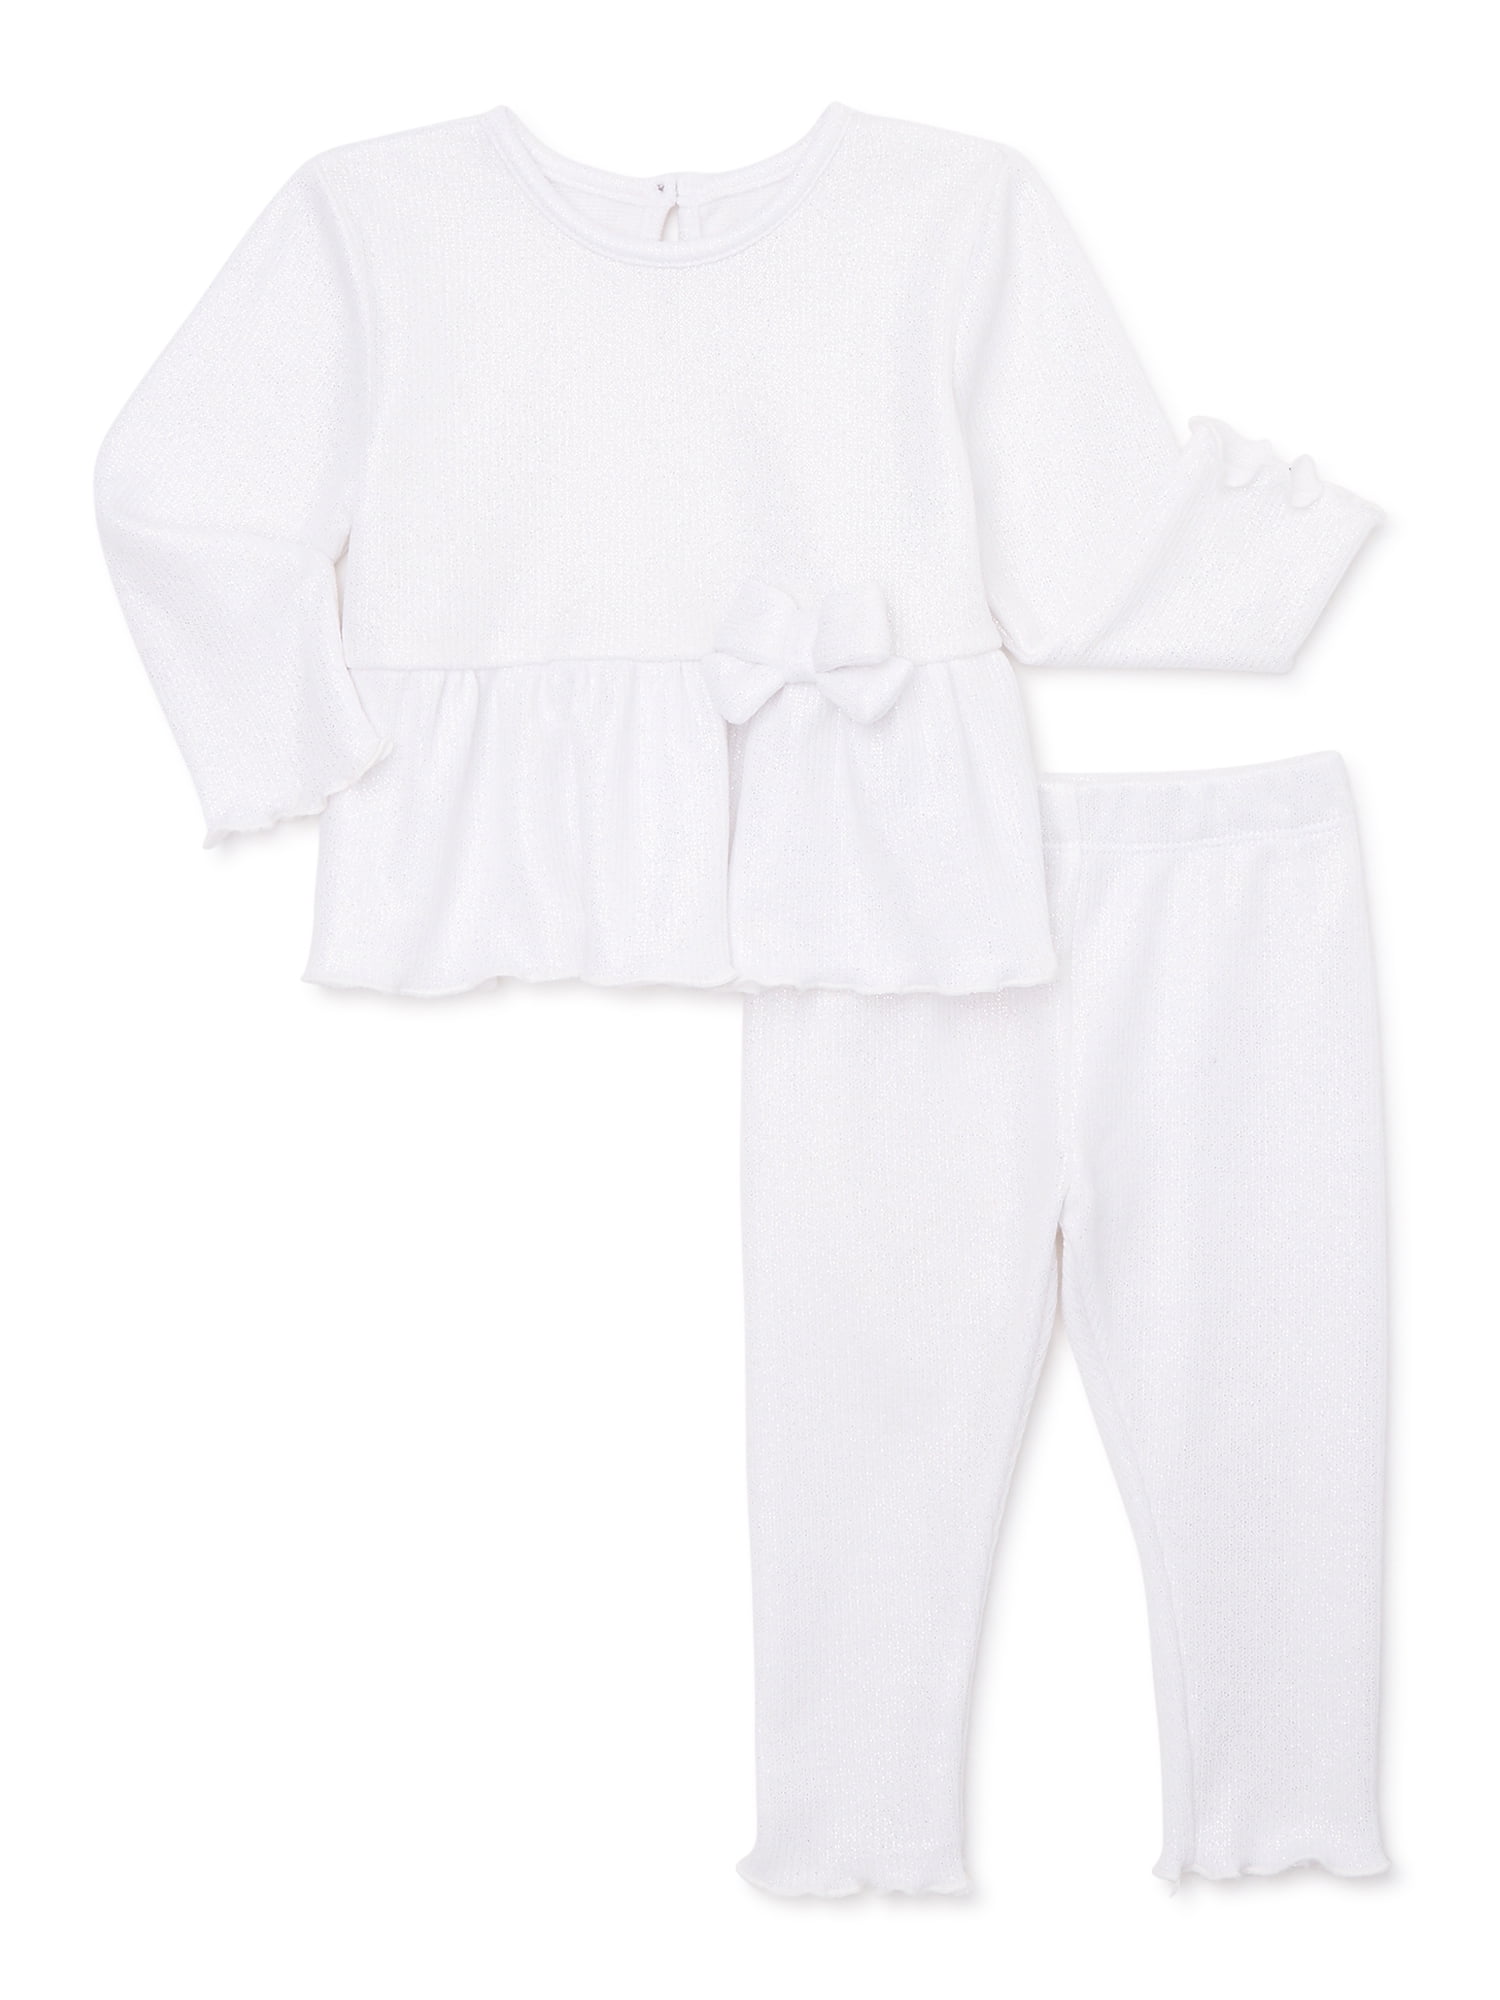 Wonder Nation Baby Girl Holiday Peplum Top and Pant Outfit Set, 2 ...